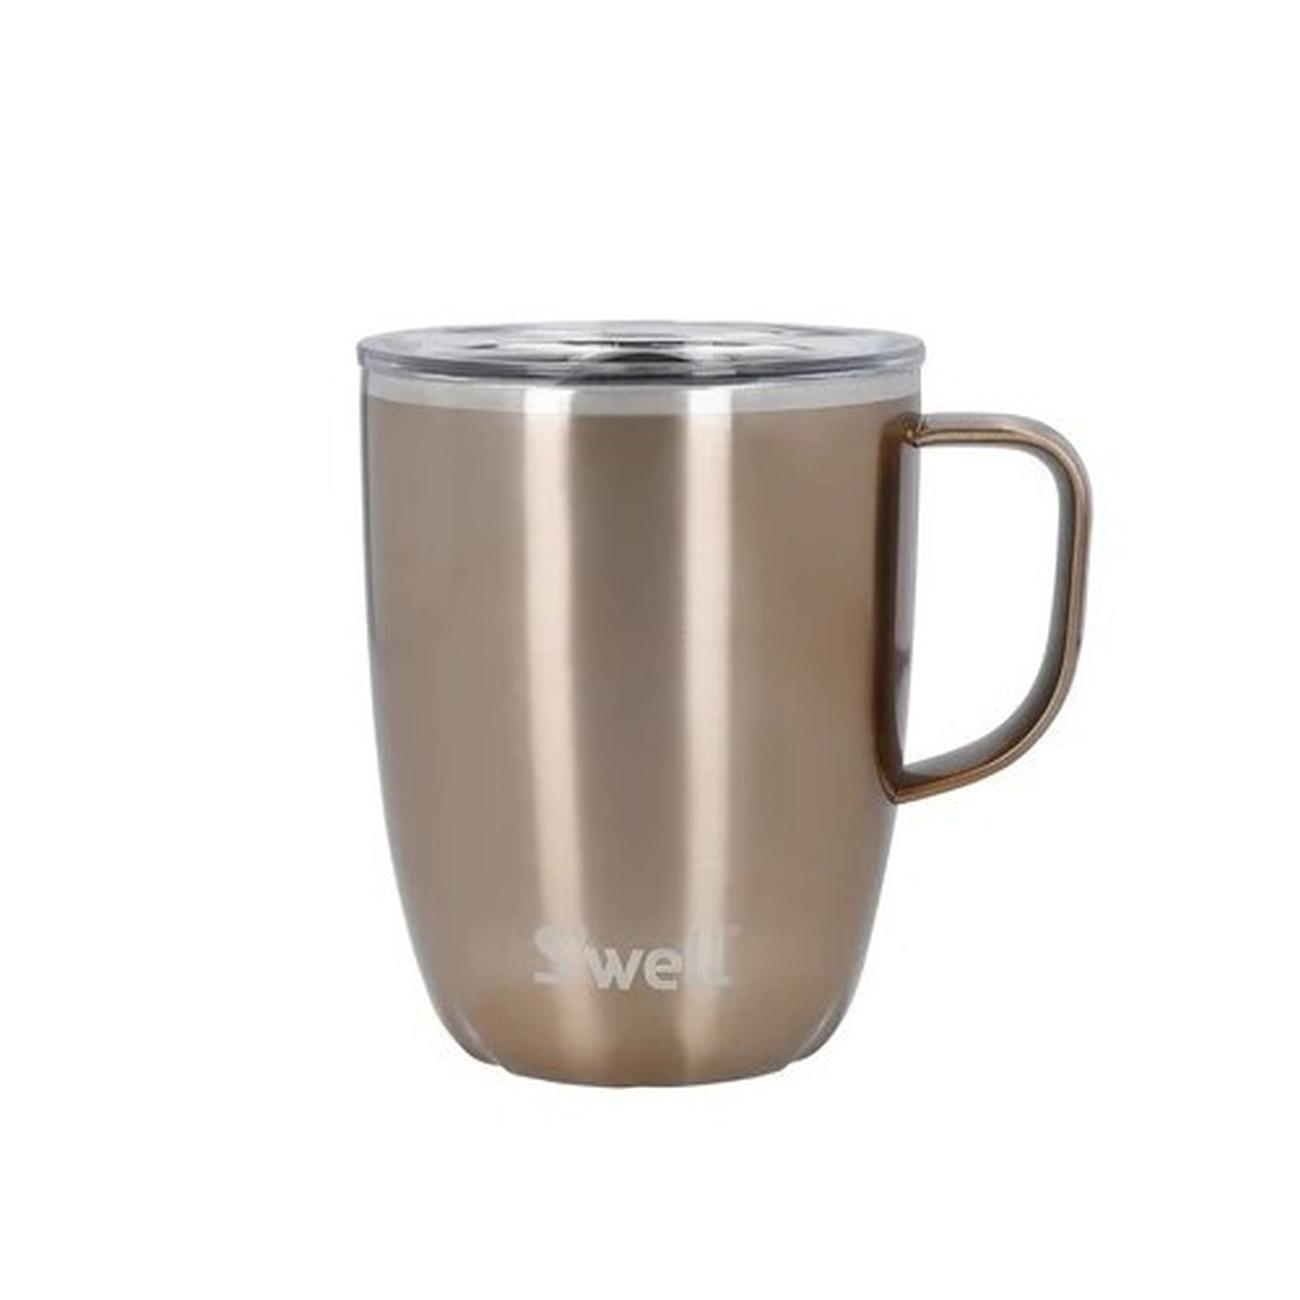 https://www.thekitchenwhisk.ie/contentfiles/productImages/Large/1683754561183_swell-pyrite-mug-w-handle-350ml-gold-5.jpeg